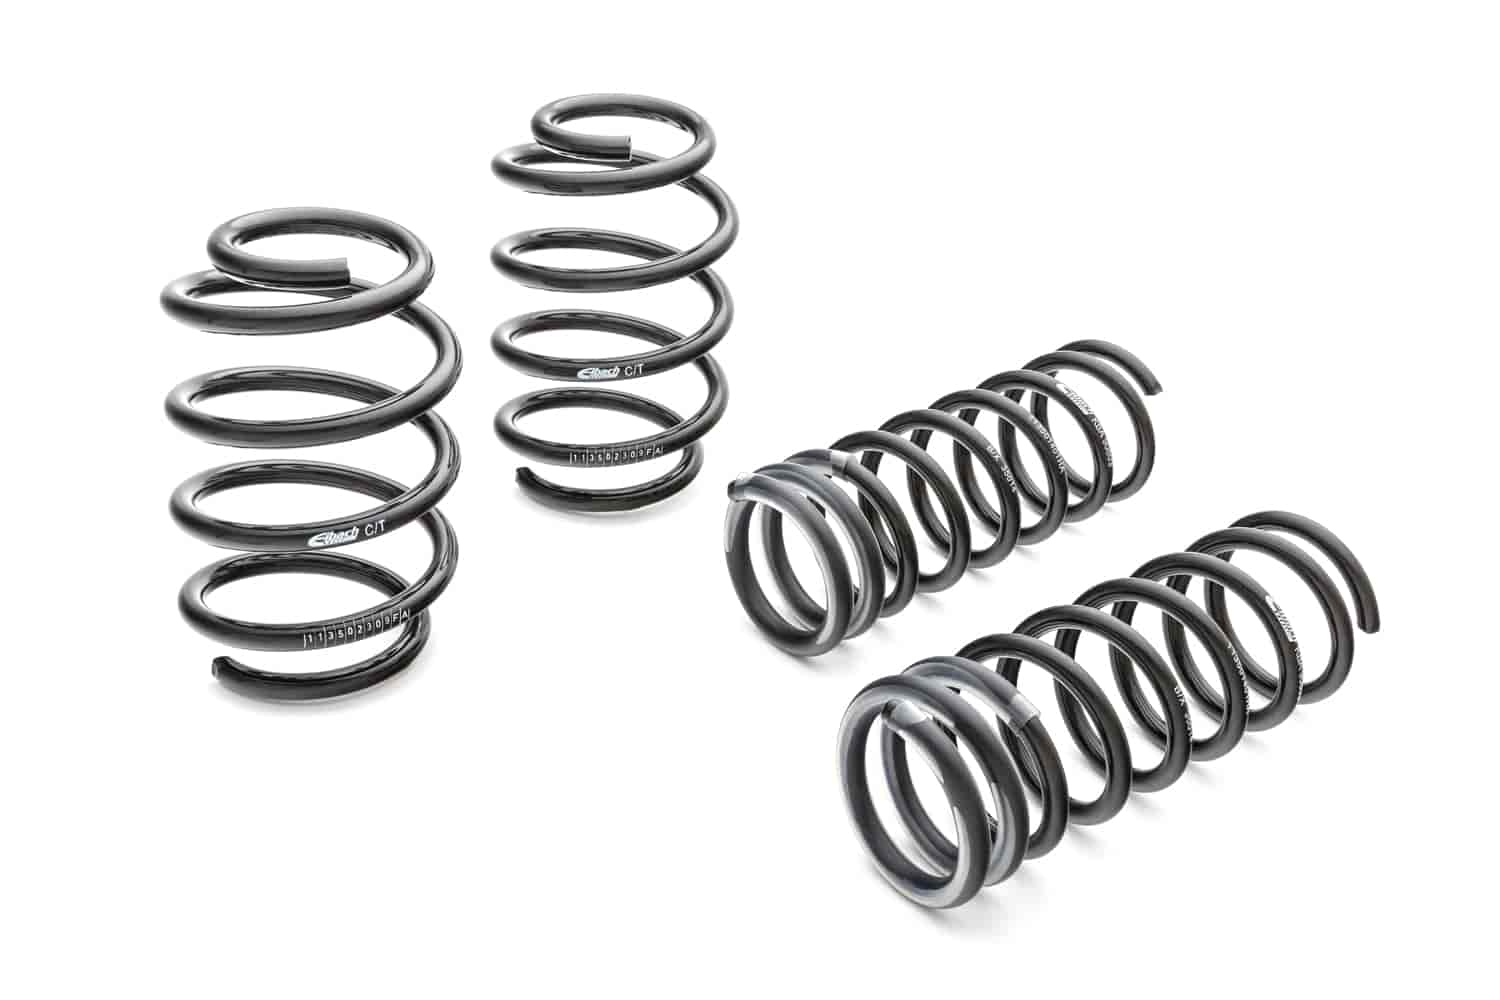 15106.140 Pro-Kit Lowering Springs 2009 Audi A4/A4 Quattro - 1.400 in. Front/Rear Drop